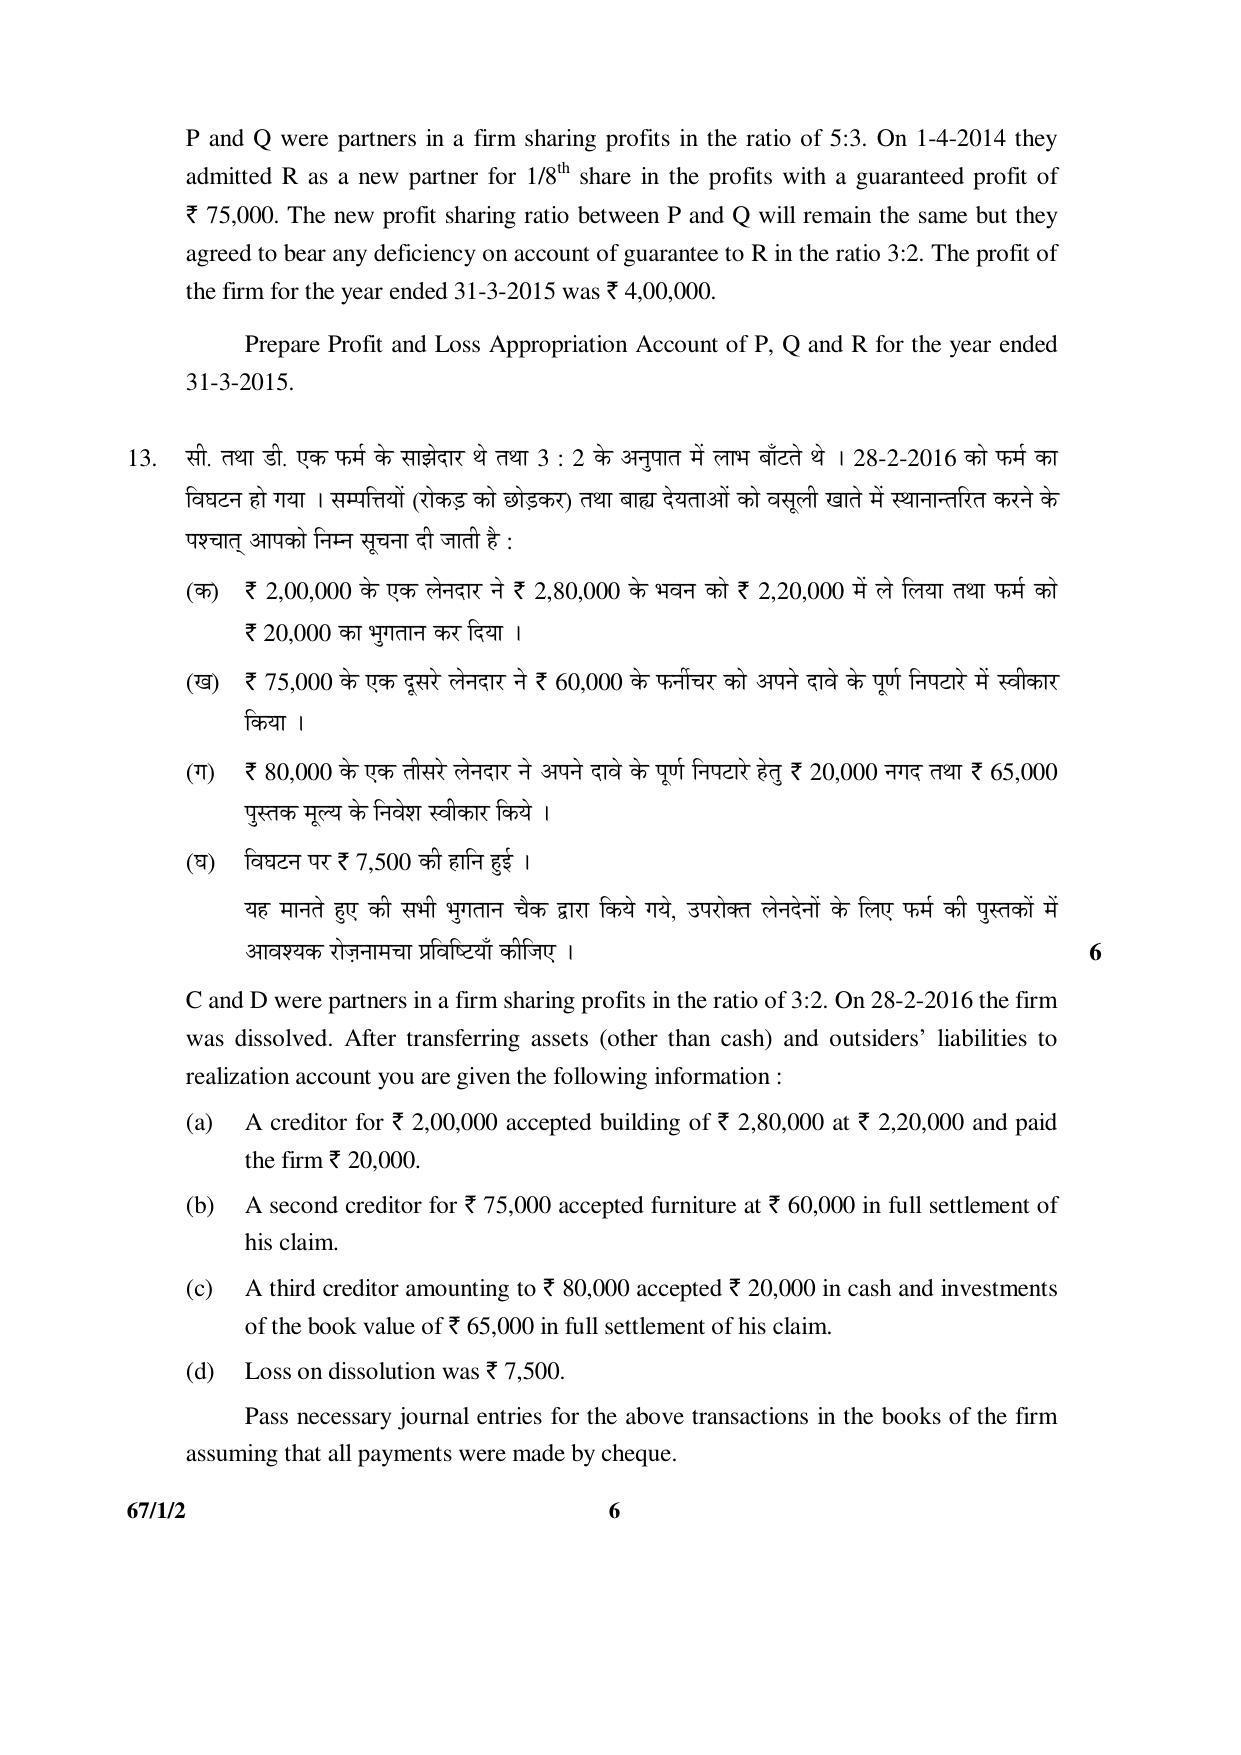 CBSE Class 12 67-1-2 ACCOUNTANCY 2016 Question Paper - Page 6